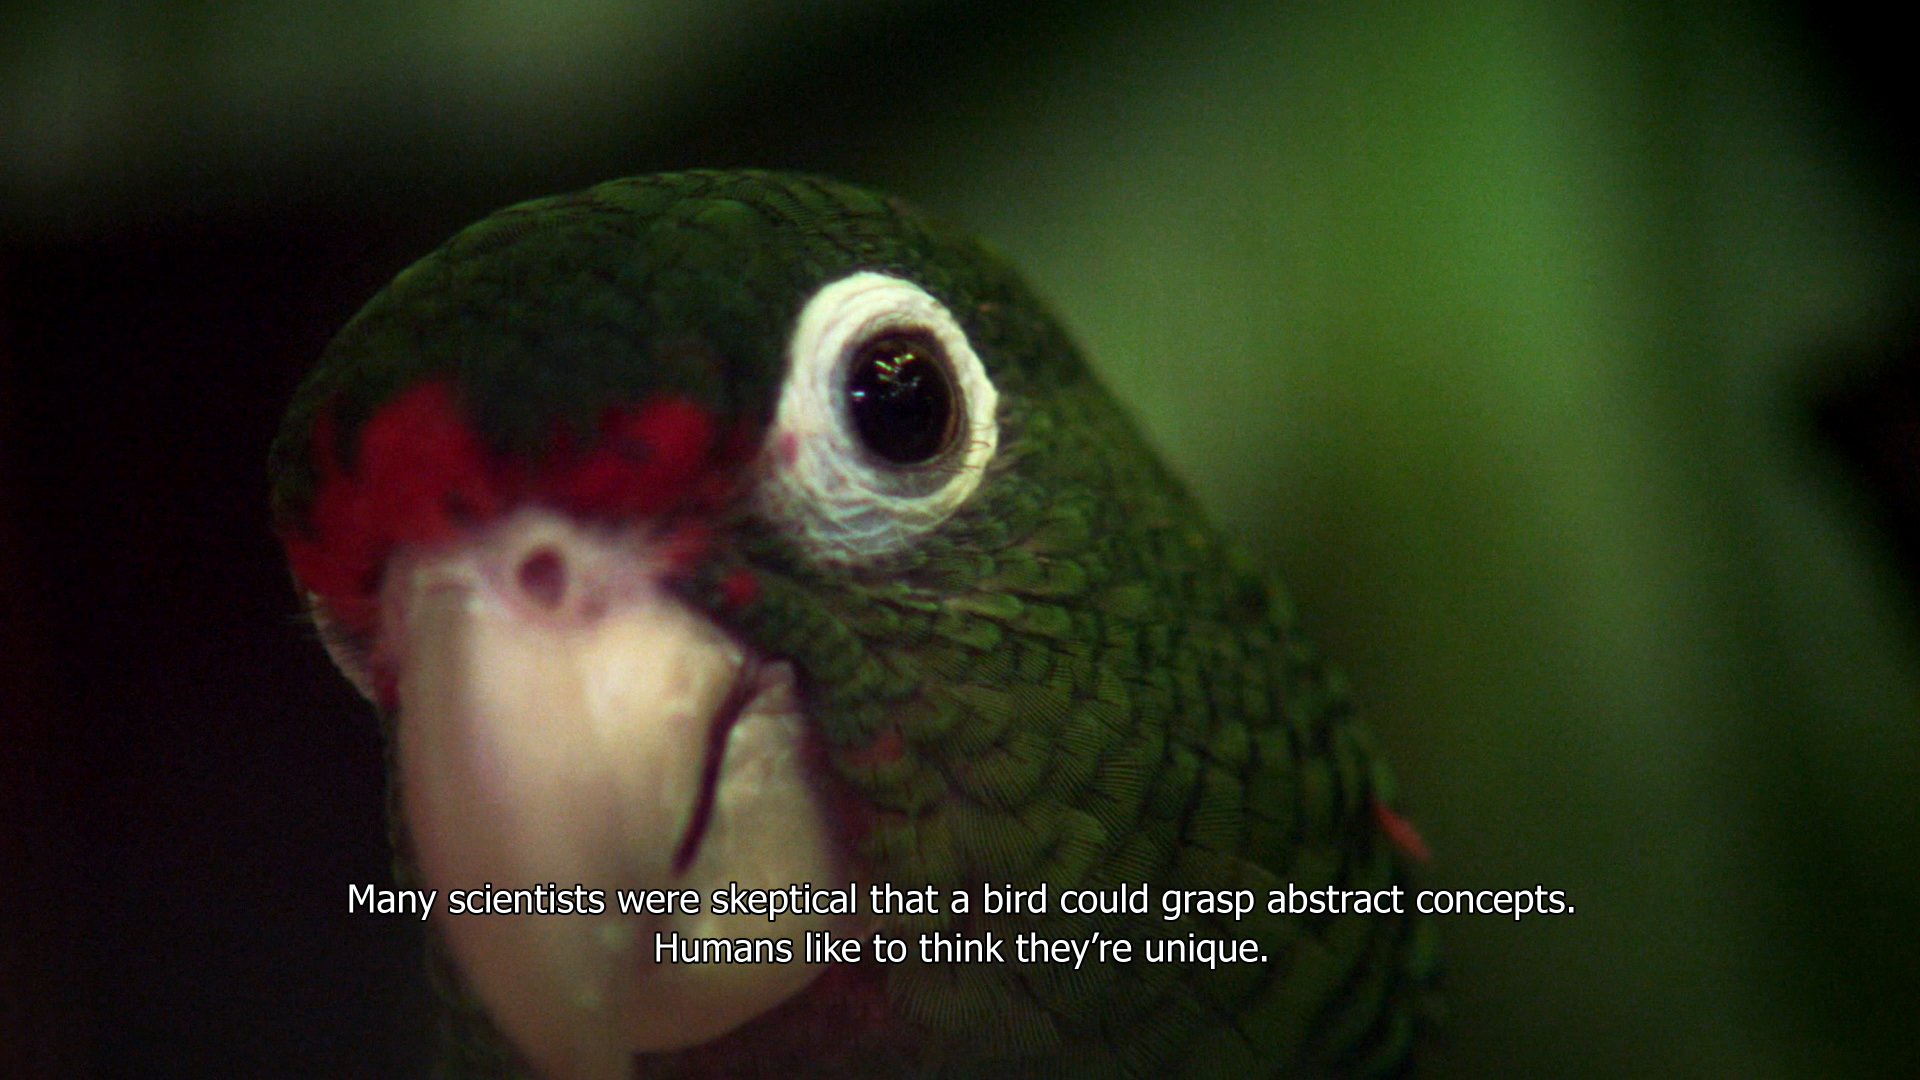 A still from "The Great Silence" which shows a parrot looking at the camera with a subtitle underneath.